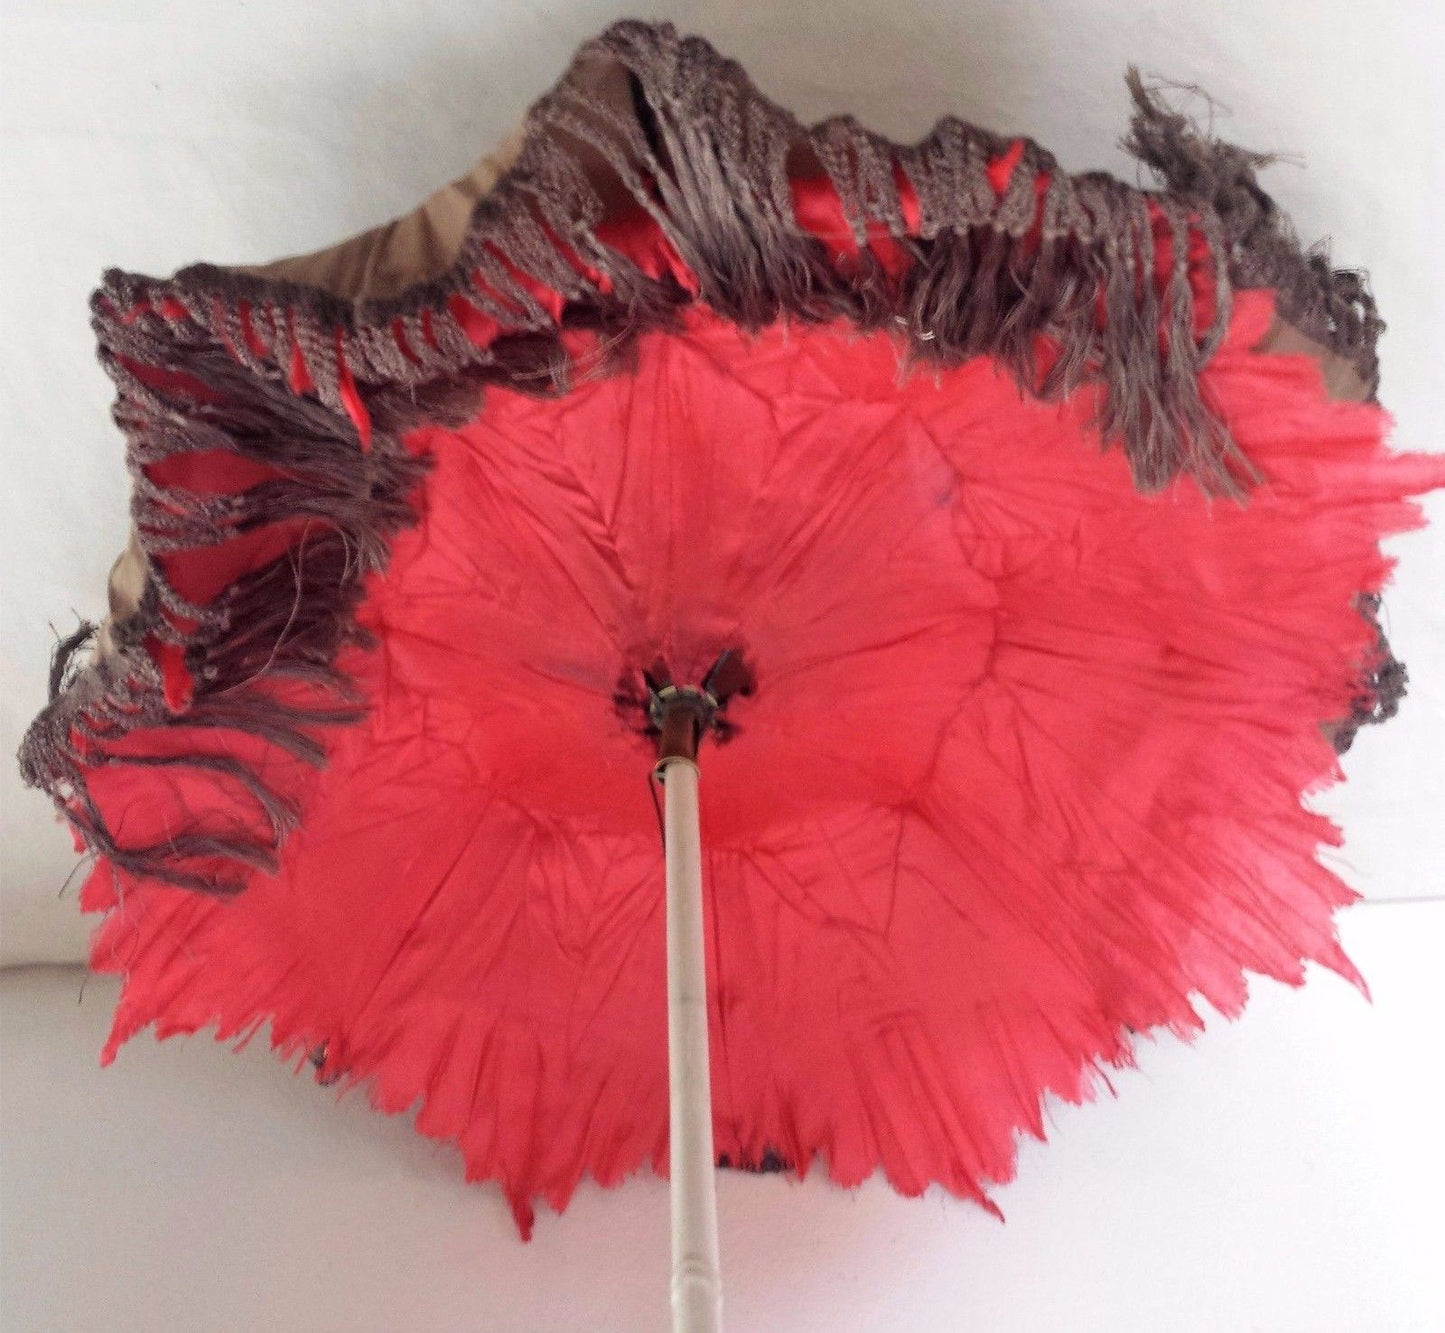 ANTIQUE VICTORIAN DOLLS PARASOL WITH SILK SHADE - WONDERFUL CARVING WORK